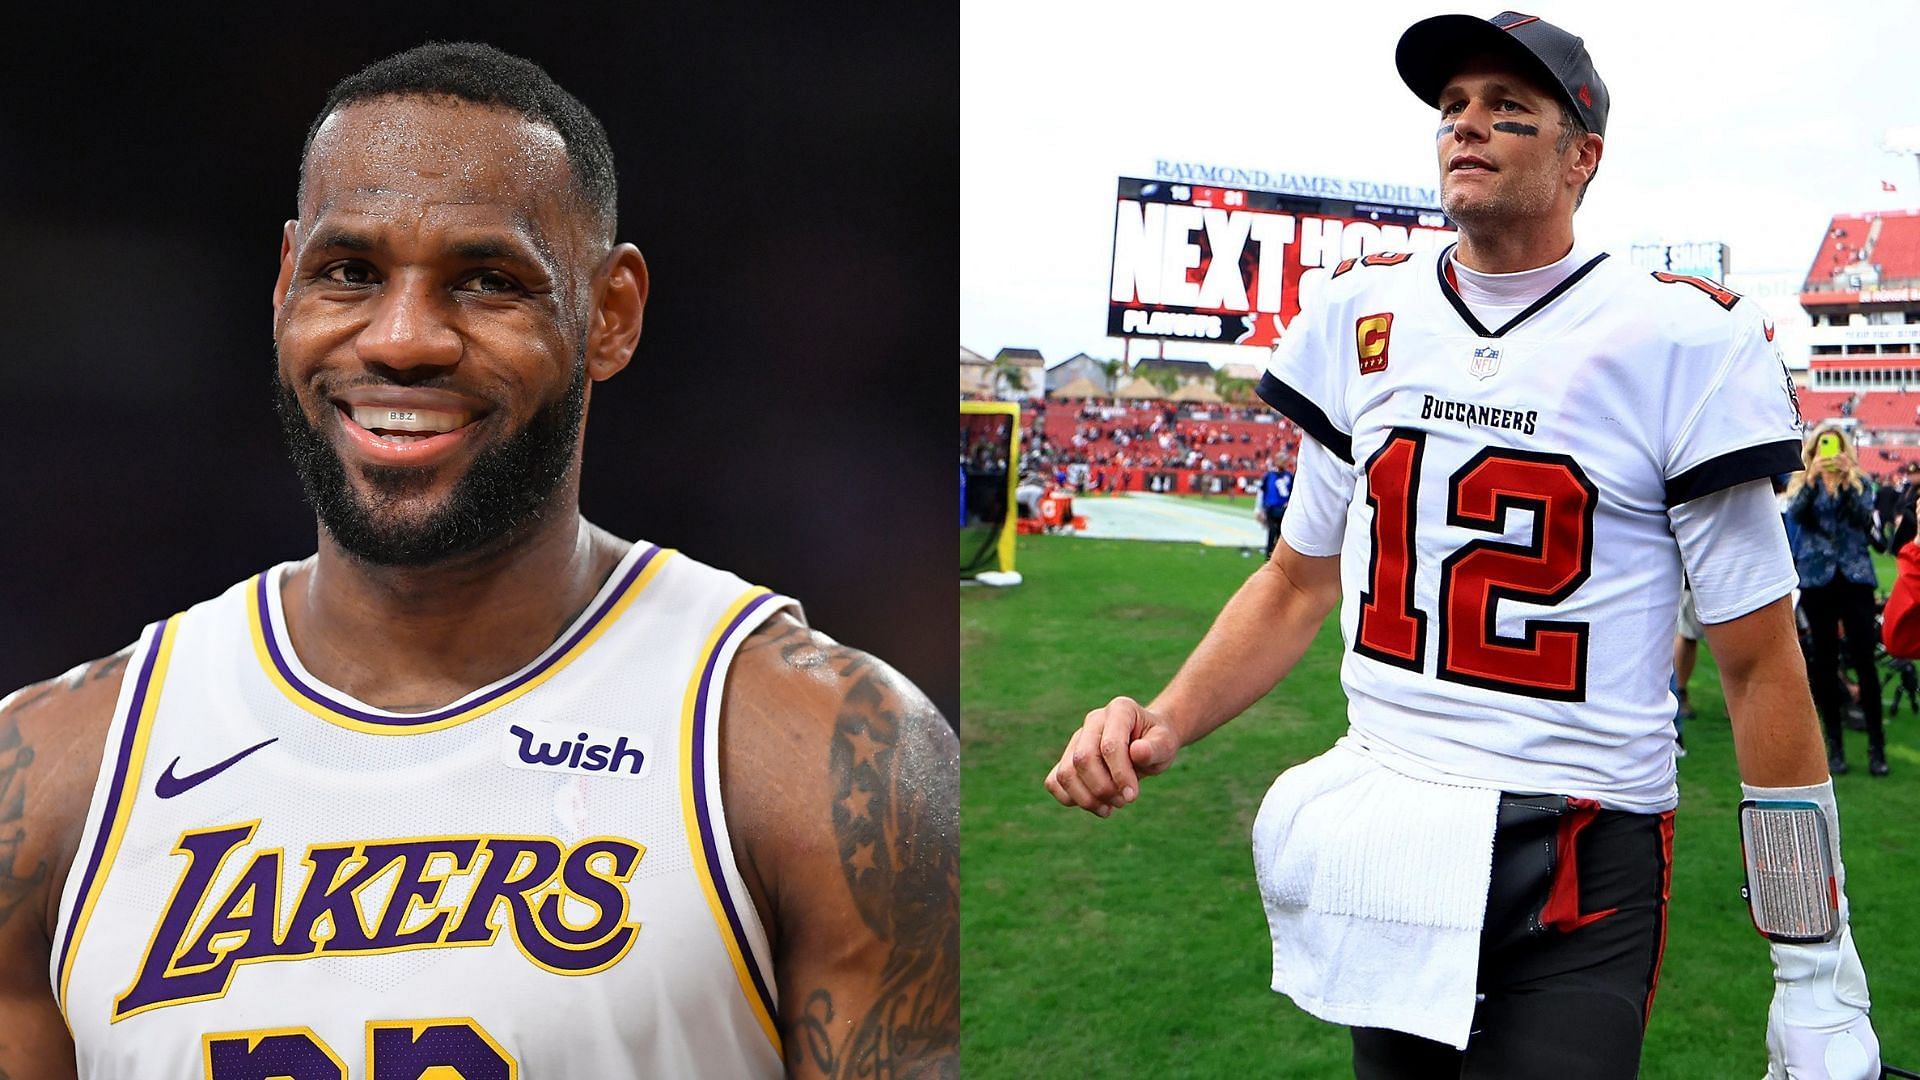 LeBron James and Tom Brady engaged in a hilarious exchange on Twitter